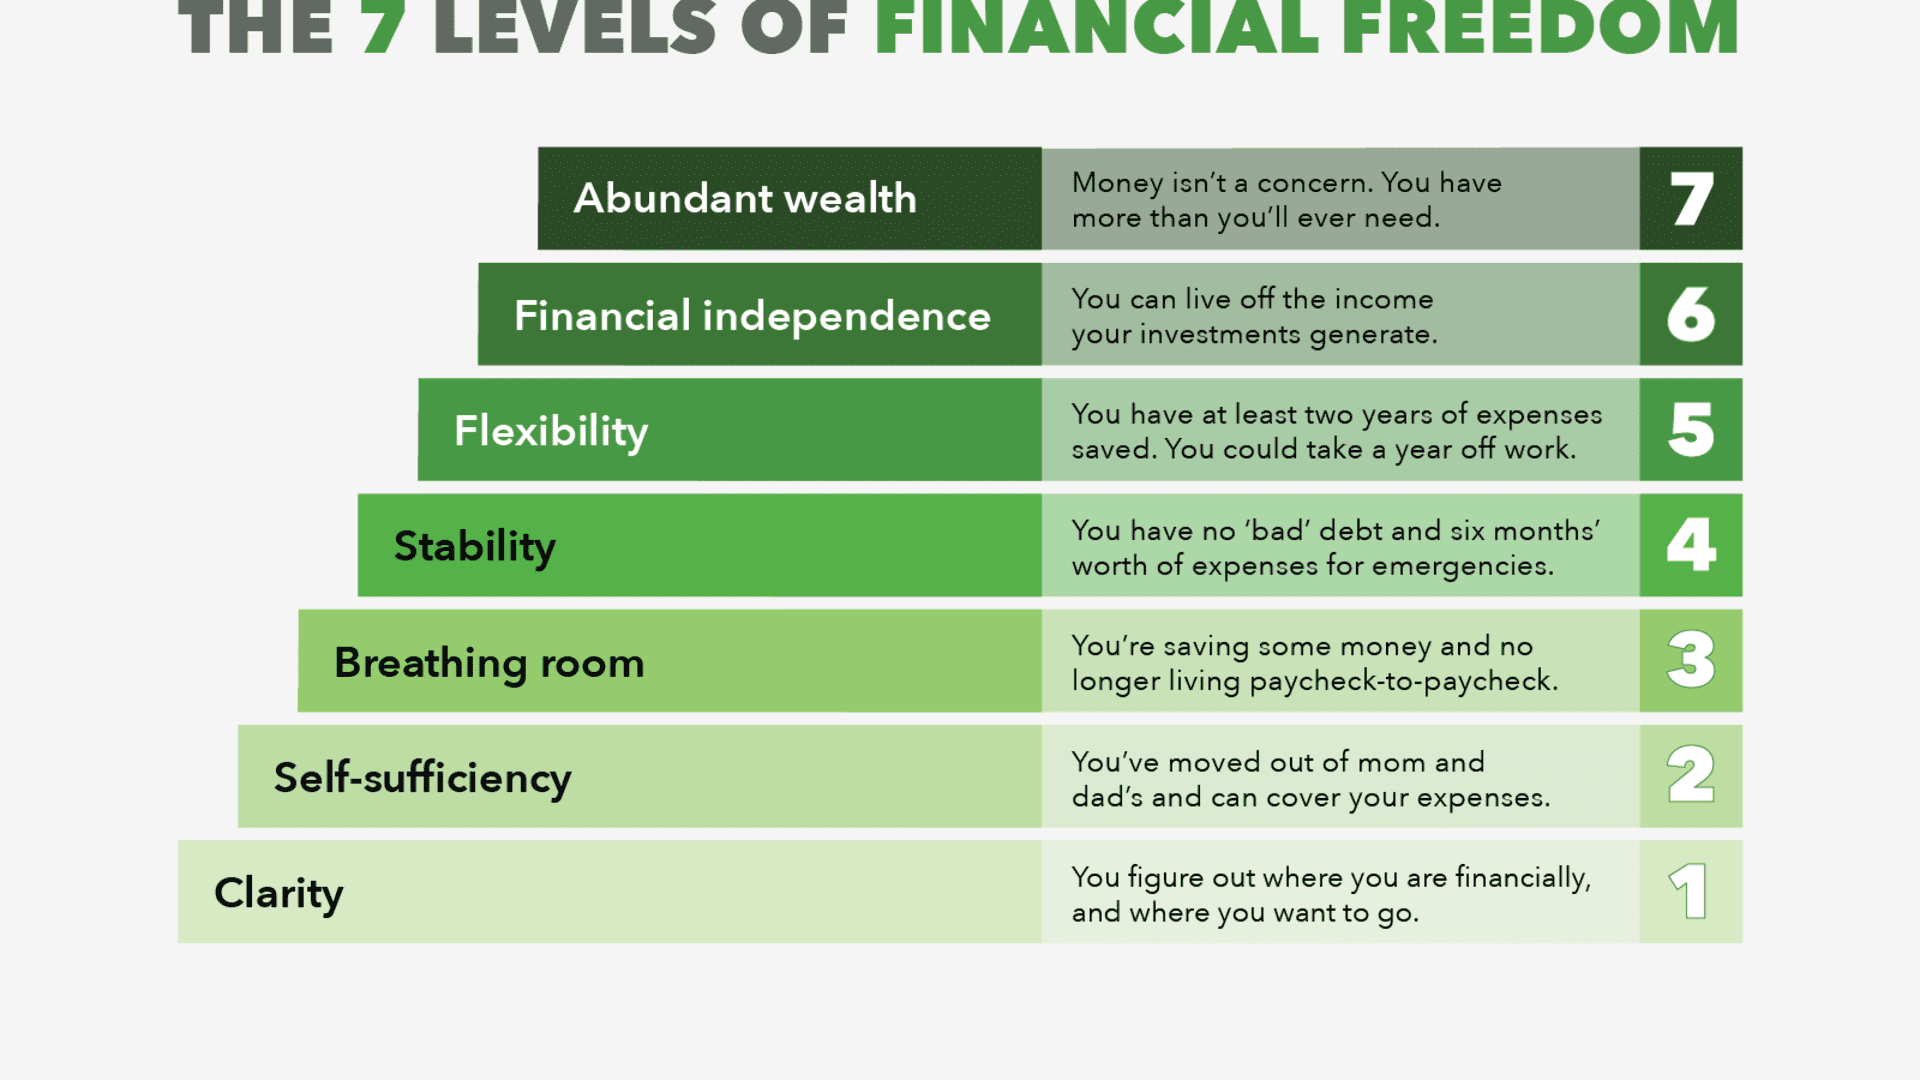 The 7 levels of financial freedom, according to a millionaire — 50% of US workers are at Level 2